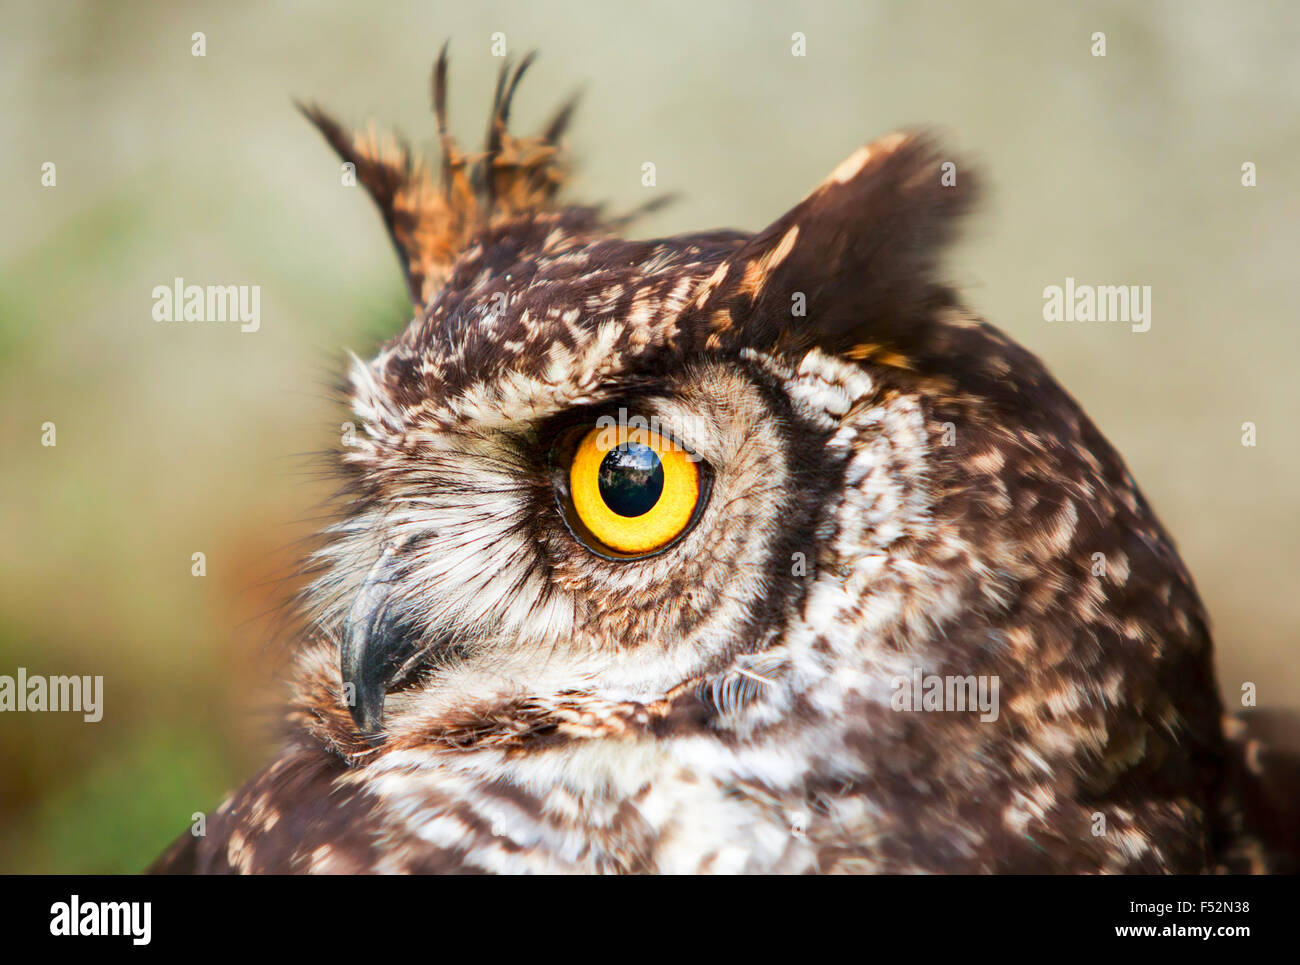 Owls Are The Order Strigiformes Constituting 200 Extant Bird Of Prey Species Most Are Solitary And Nocturnal Stock Photo